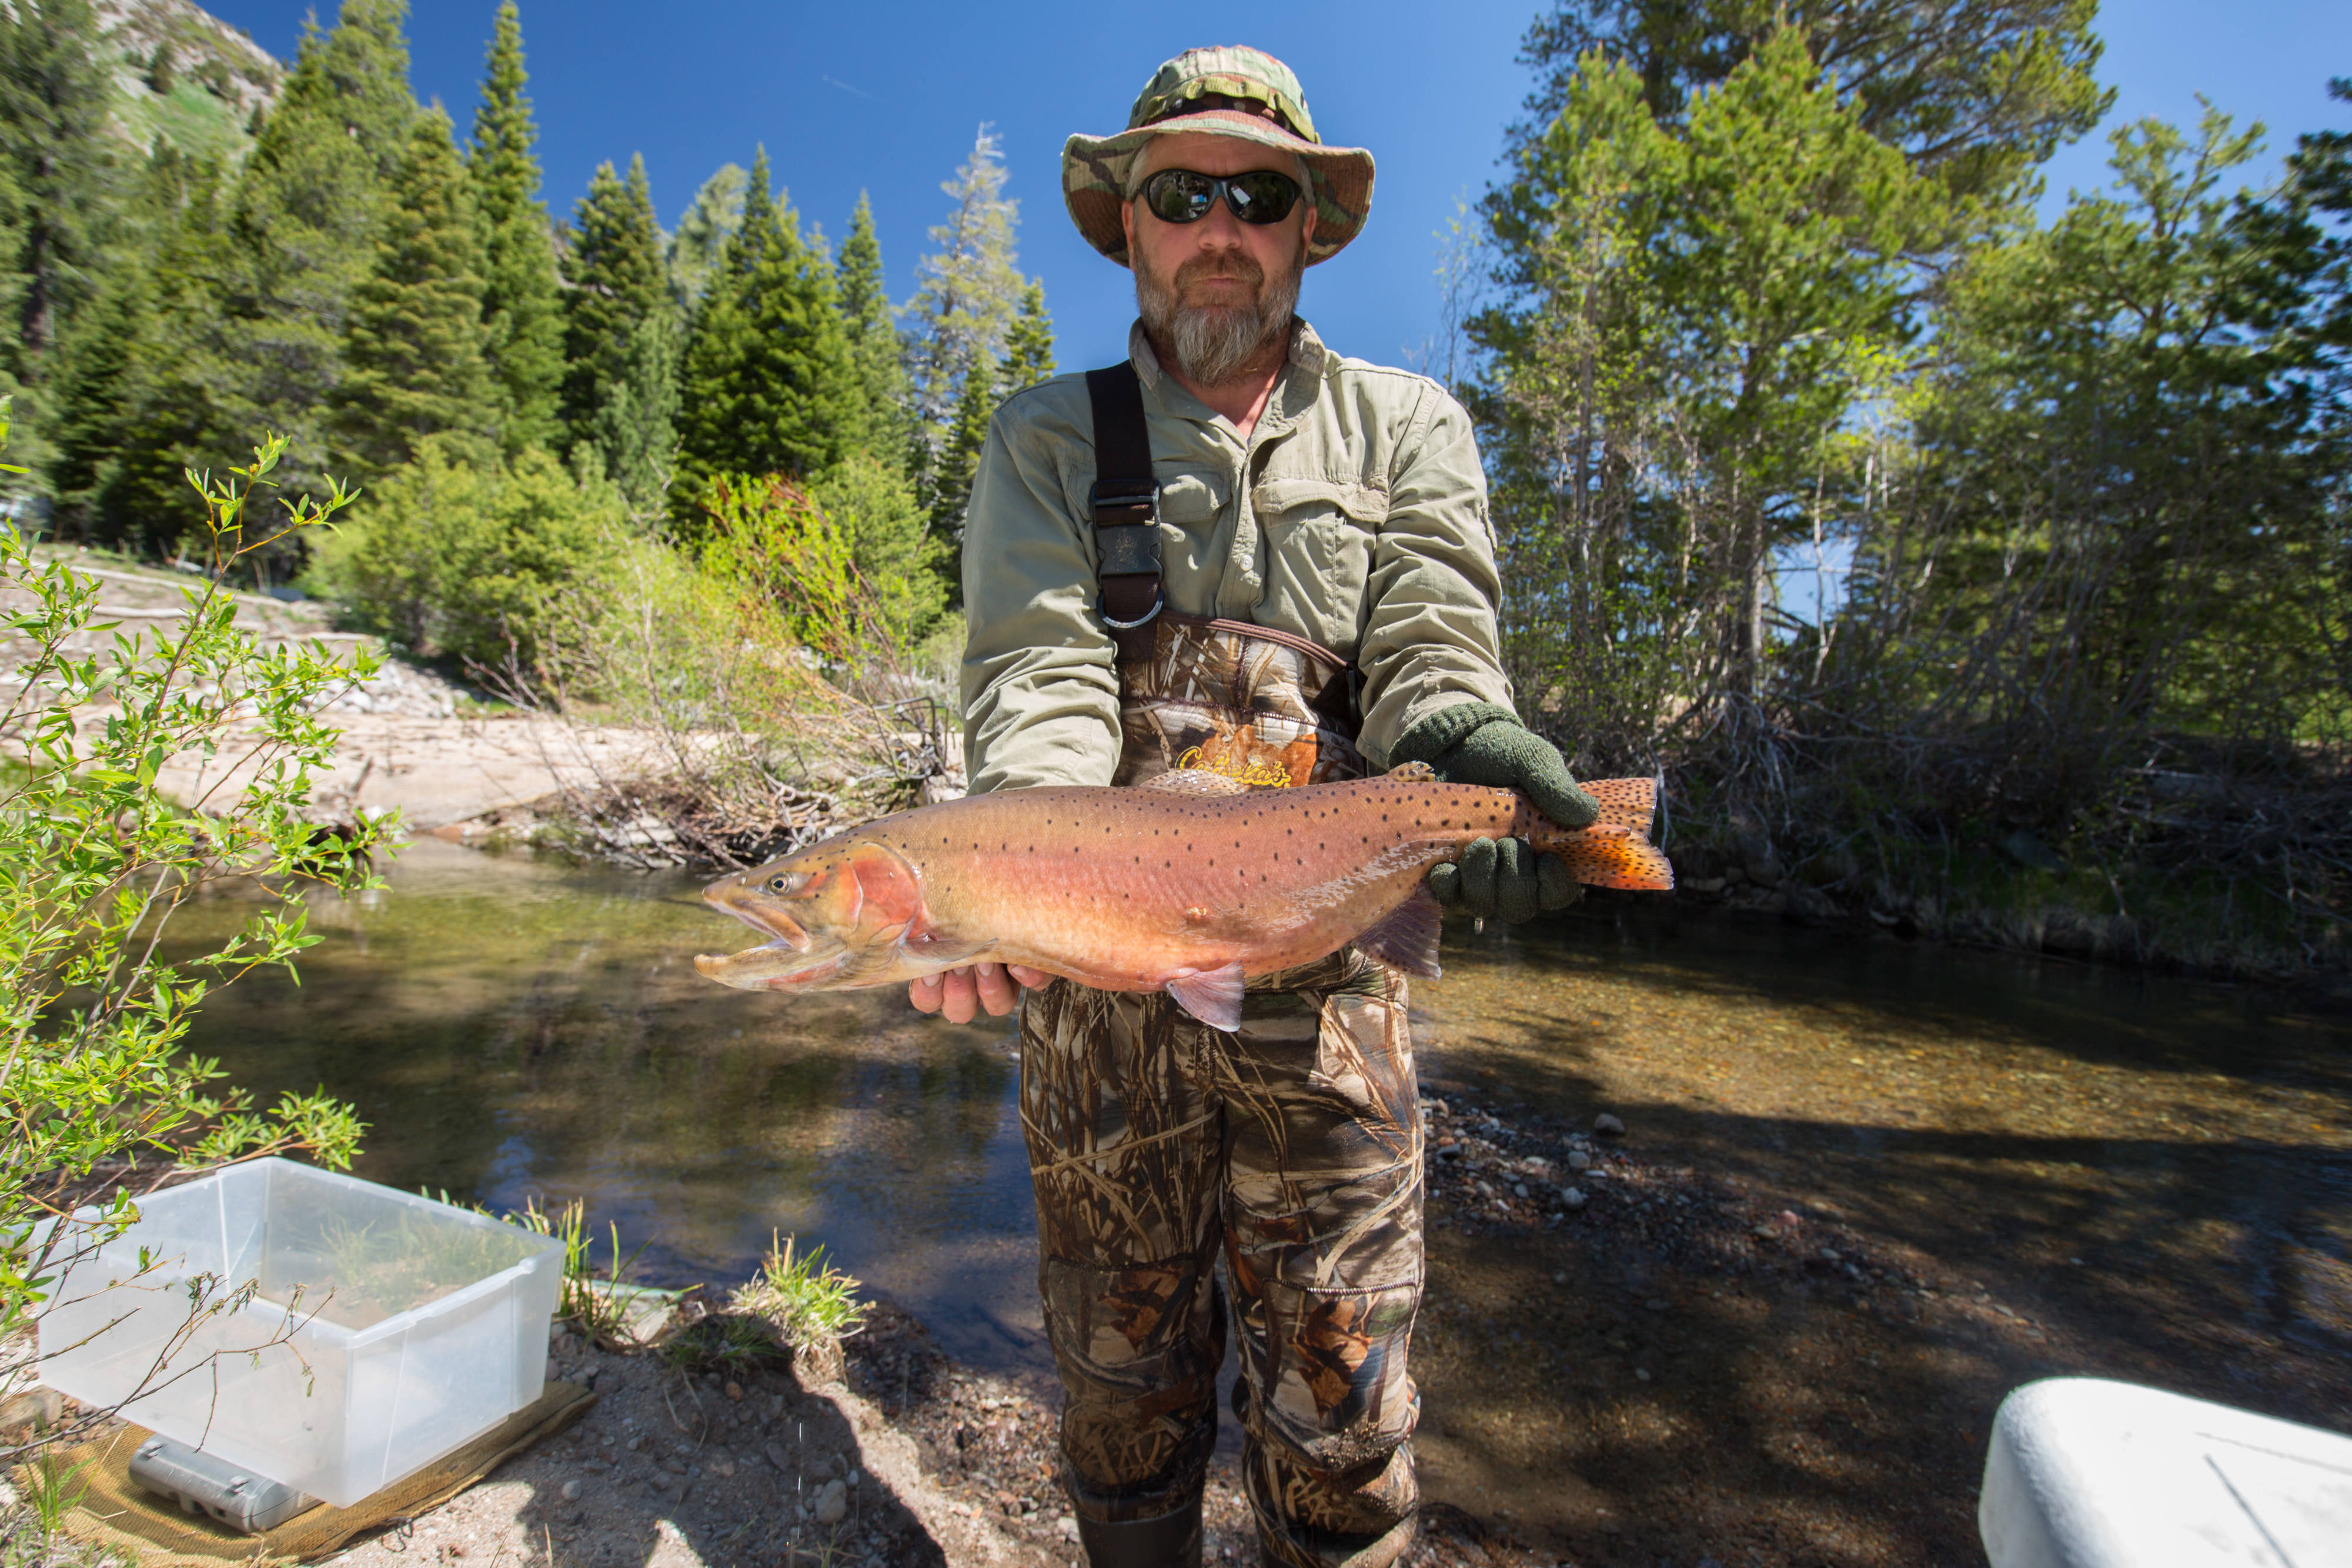 Researcher holding a Lahontan cutthroat trout.